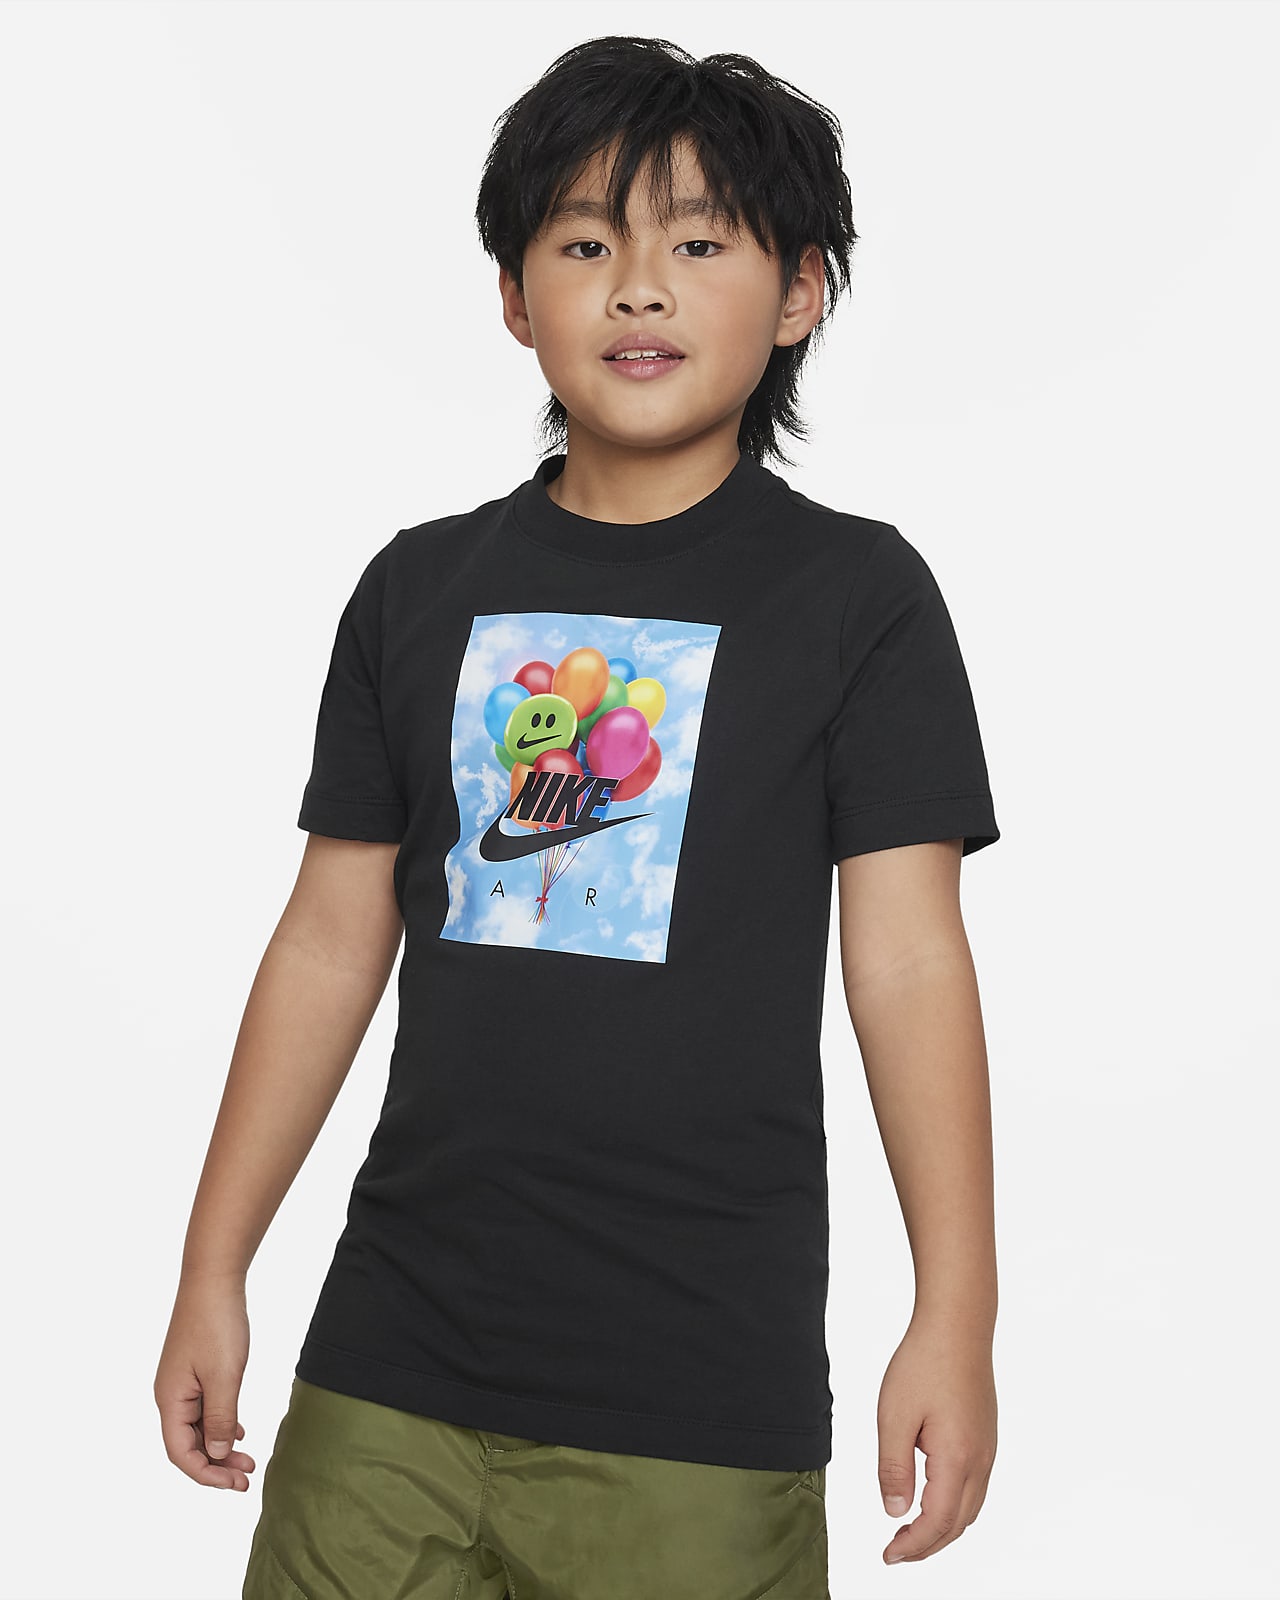 Nike Boys (The Nike Tee) T Shirt Size:Youth Small Age:8/10